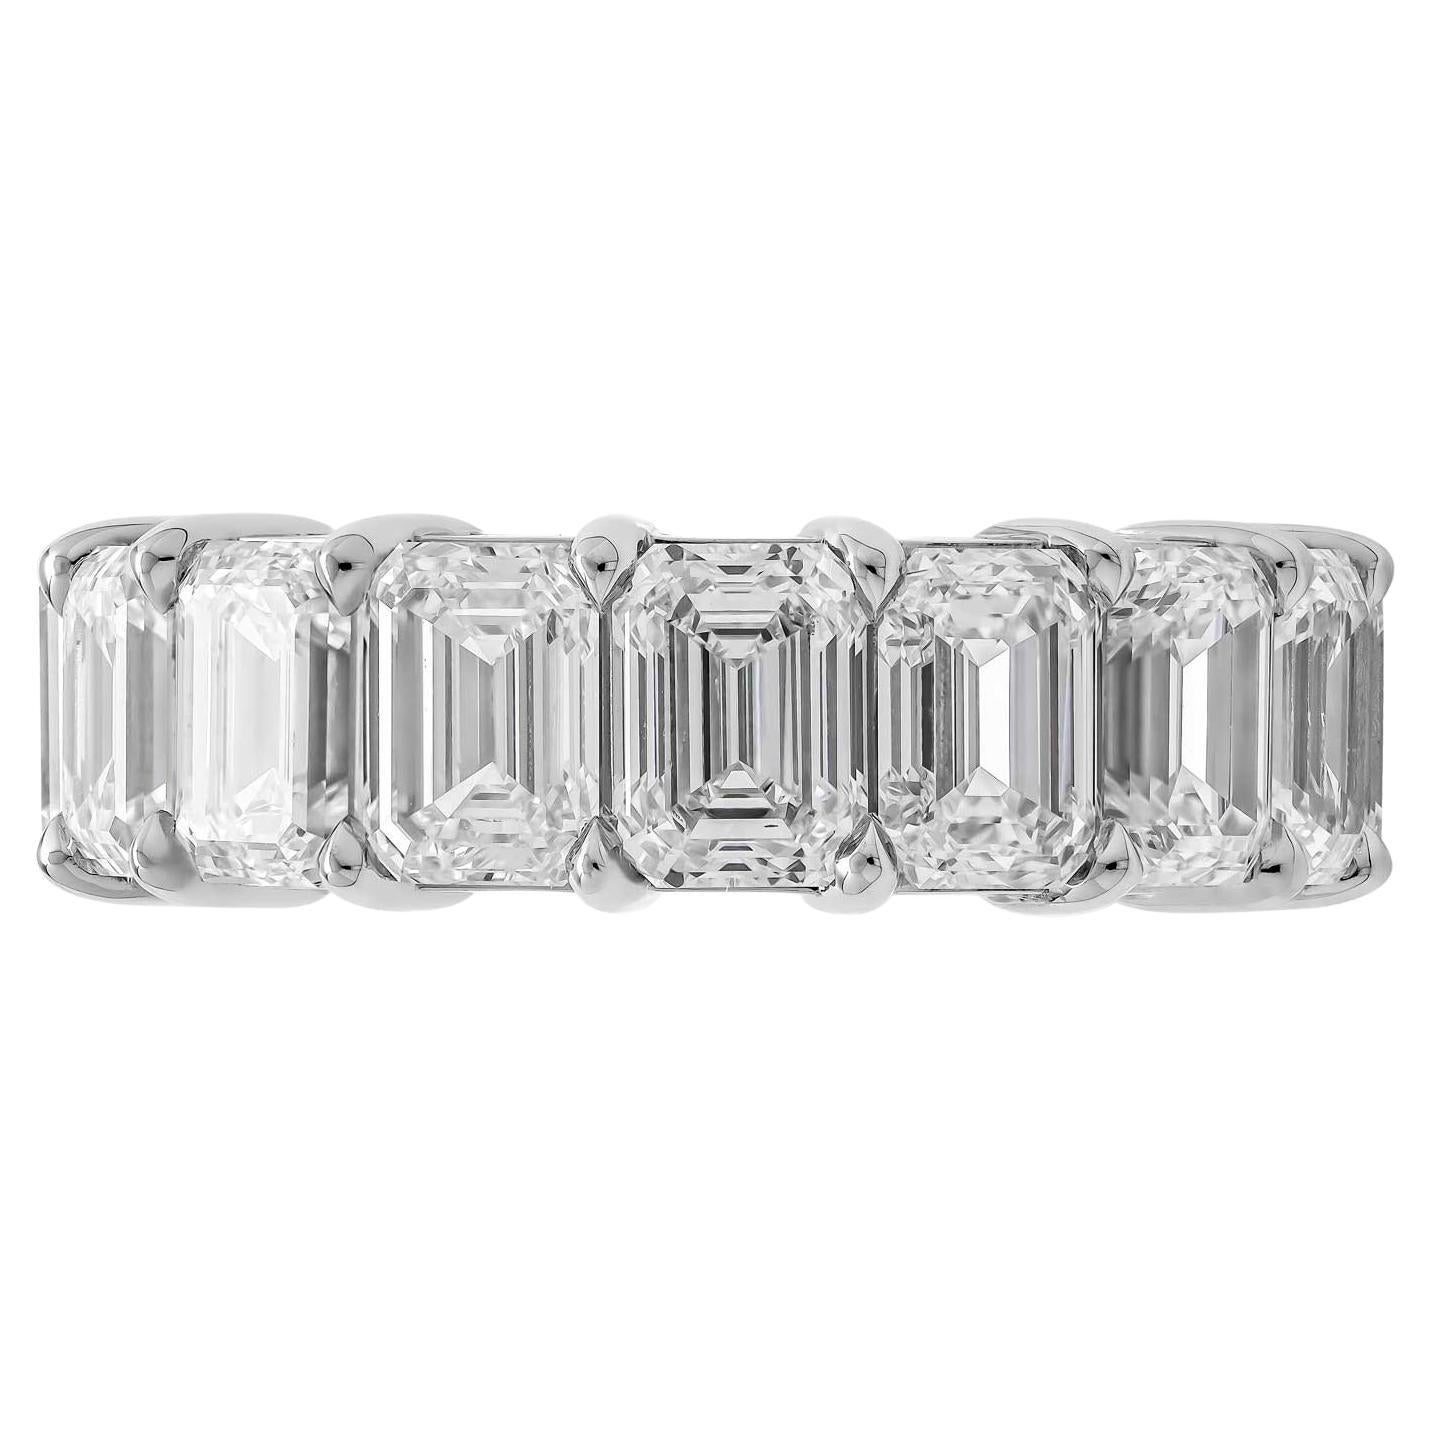 Emerald cut eternity band in PT950;
16 stones (11.23ct) .70ct each
Size 6 ¾ 
All GIAs:
0.70CT G VS2 GIA#7403271414 
0.70CT G VVS1 GIA#7408400660
0.71CT E VS2 GIA#6214732054 
0.70CT E VS2 GIA#7391656707 
0.70CT G VVS1 GIA#2397469216
0.70CT G VS2